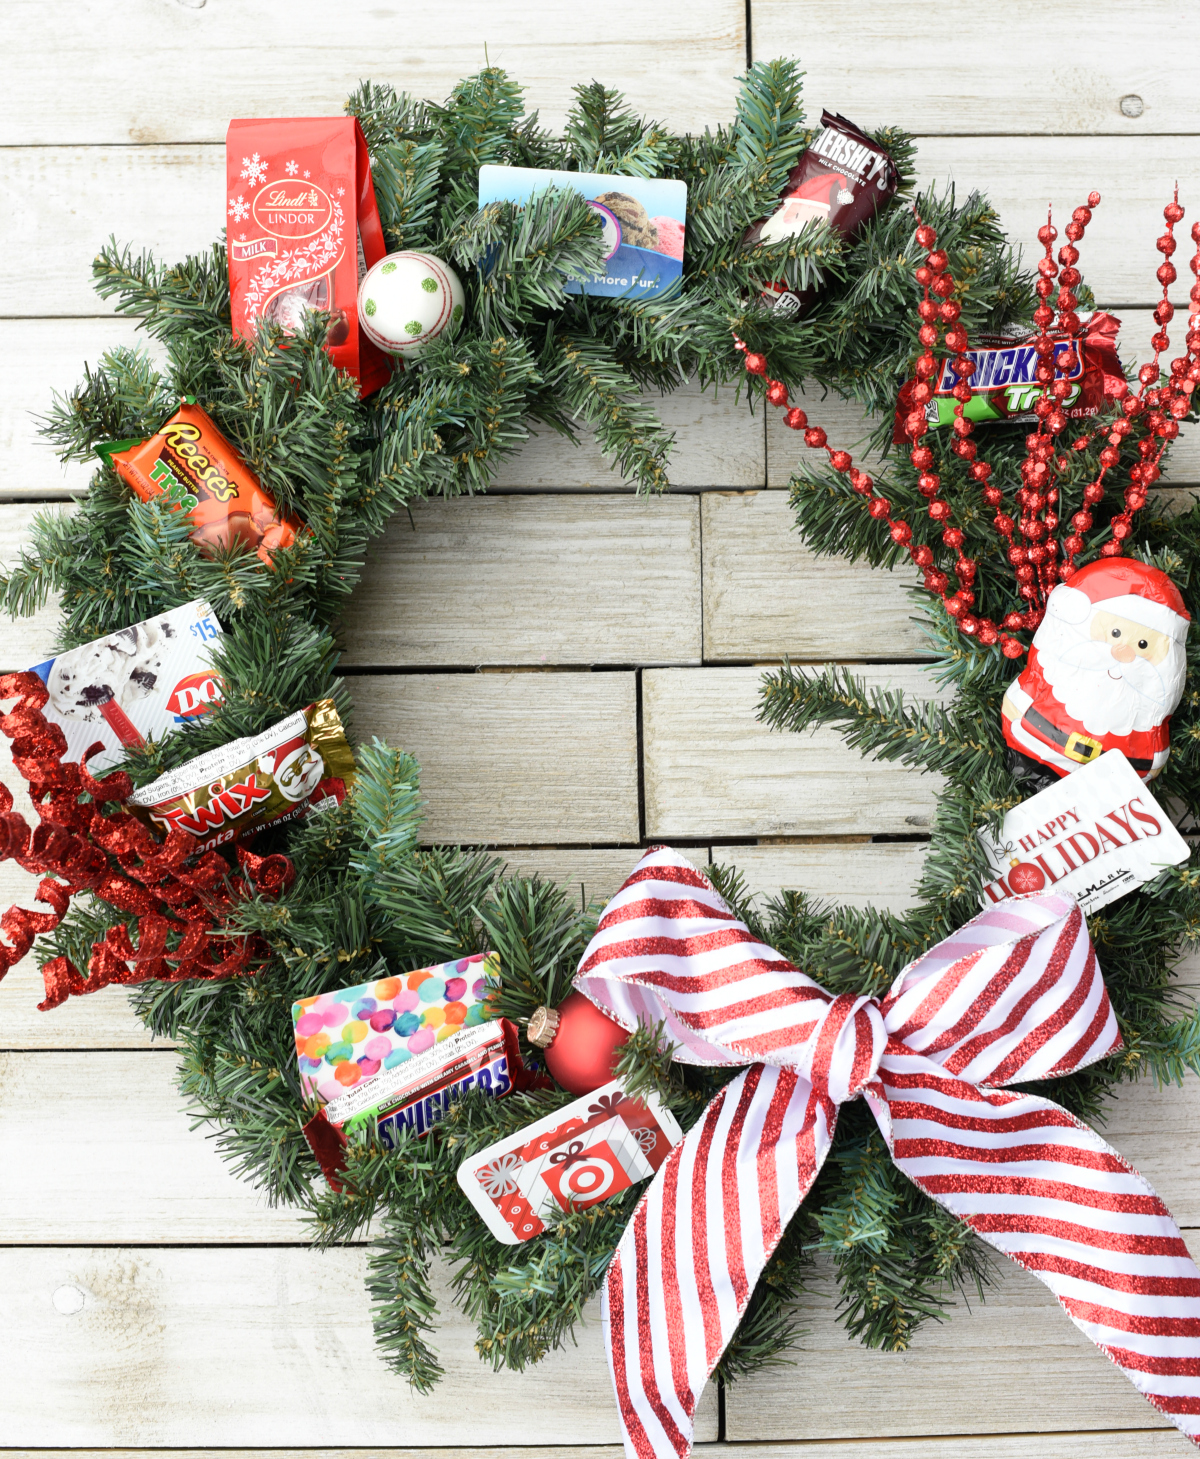 Creative Christmas Gifts-This gift card wreath makes a fun gift to give someone this holiday season! Add gift cards, candy and decorations for a fun, unique and creative Christmas gift idea. #christmasgifts #christmasgiftideas #christmaswreath